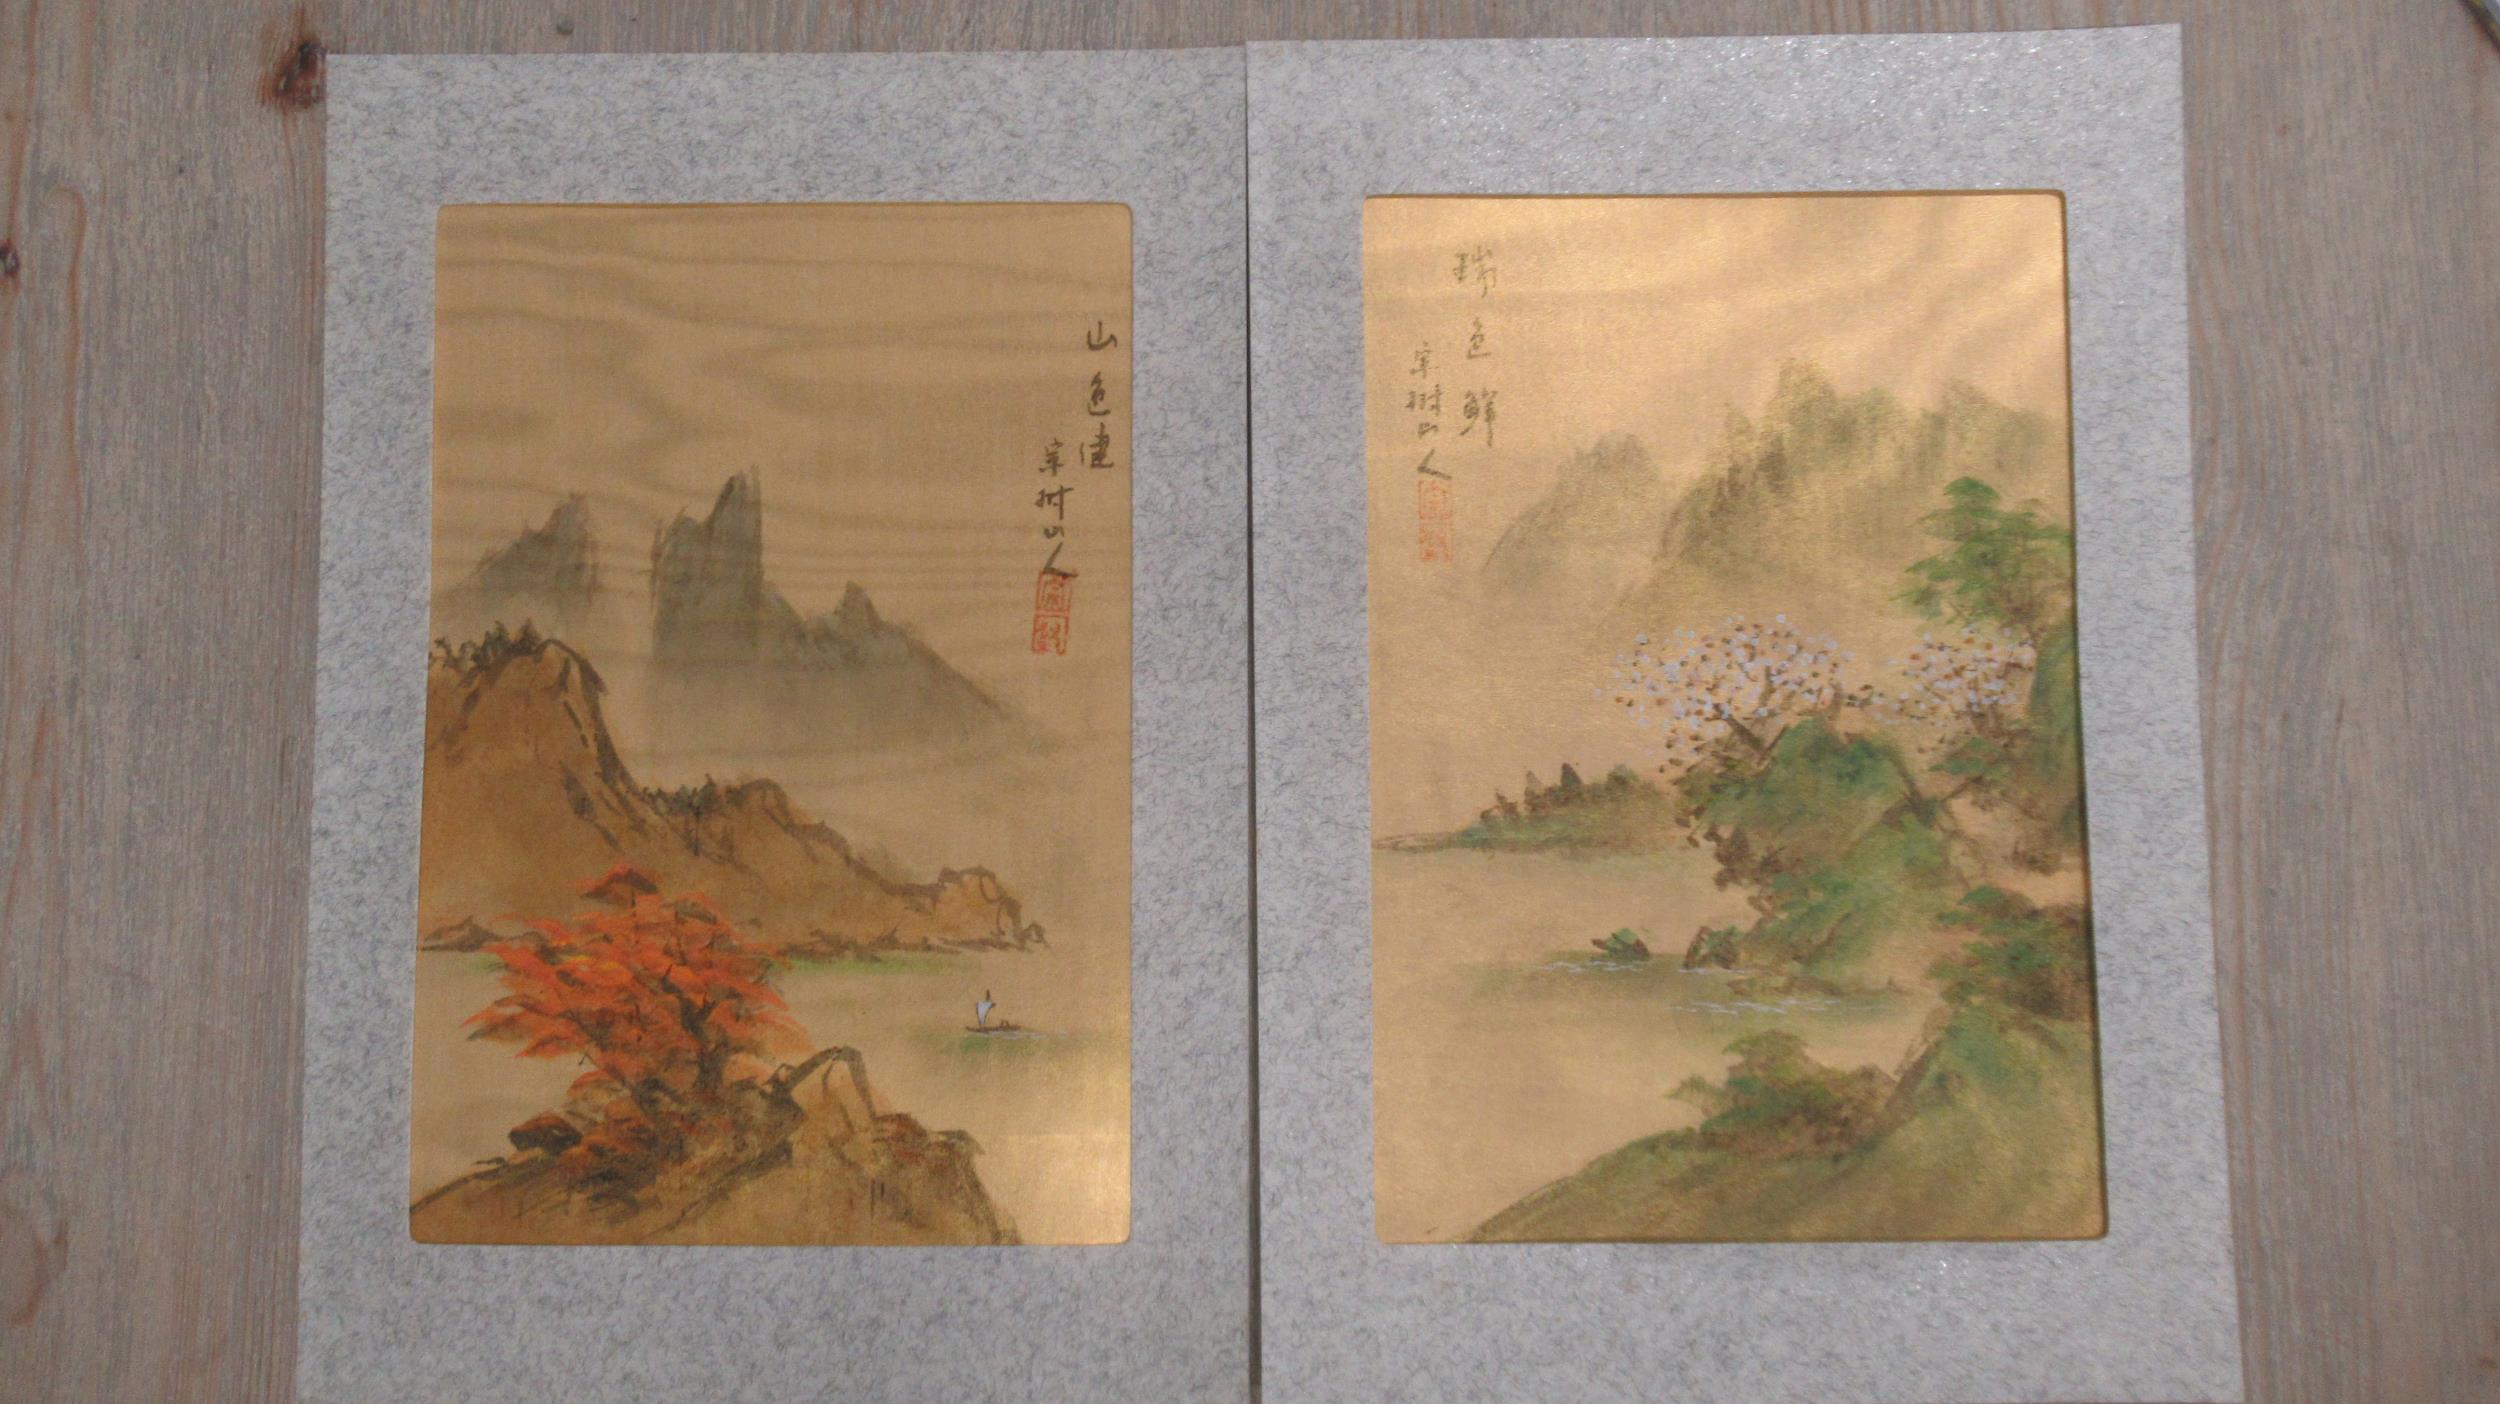 A pair of modern Japanese watercolour/gouache landscapes on silk - signed - 30cm x 20cm